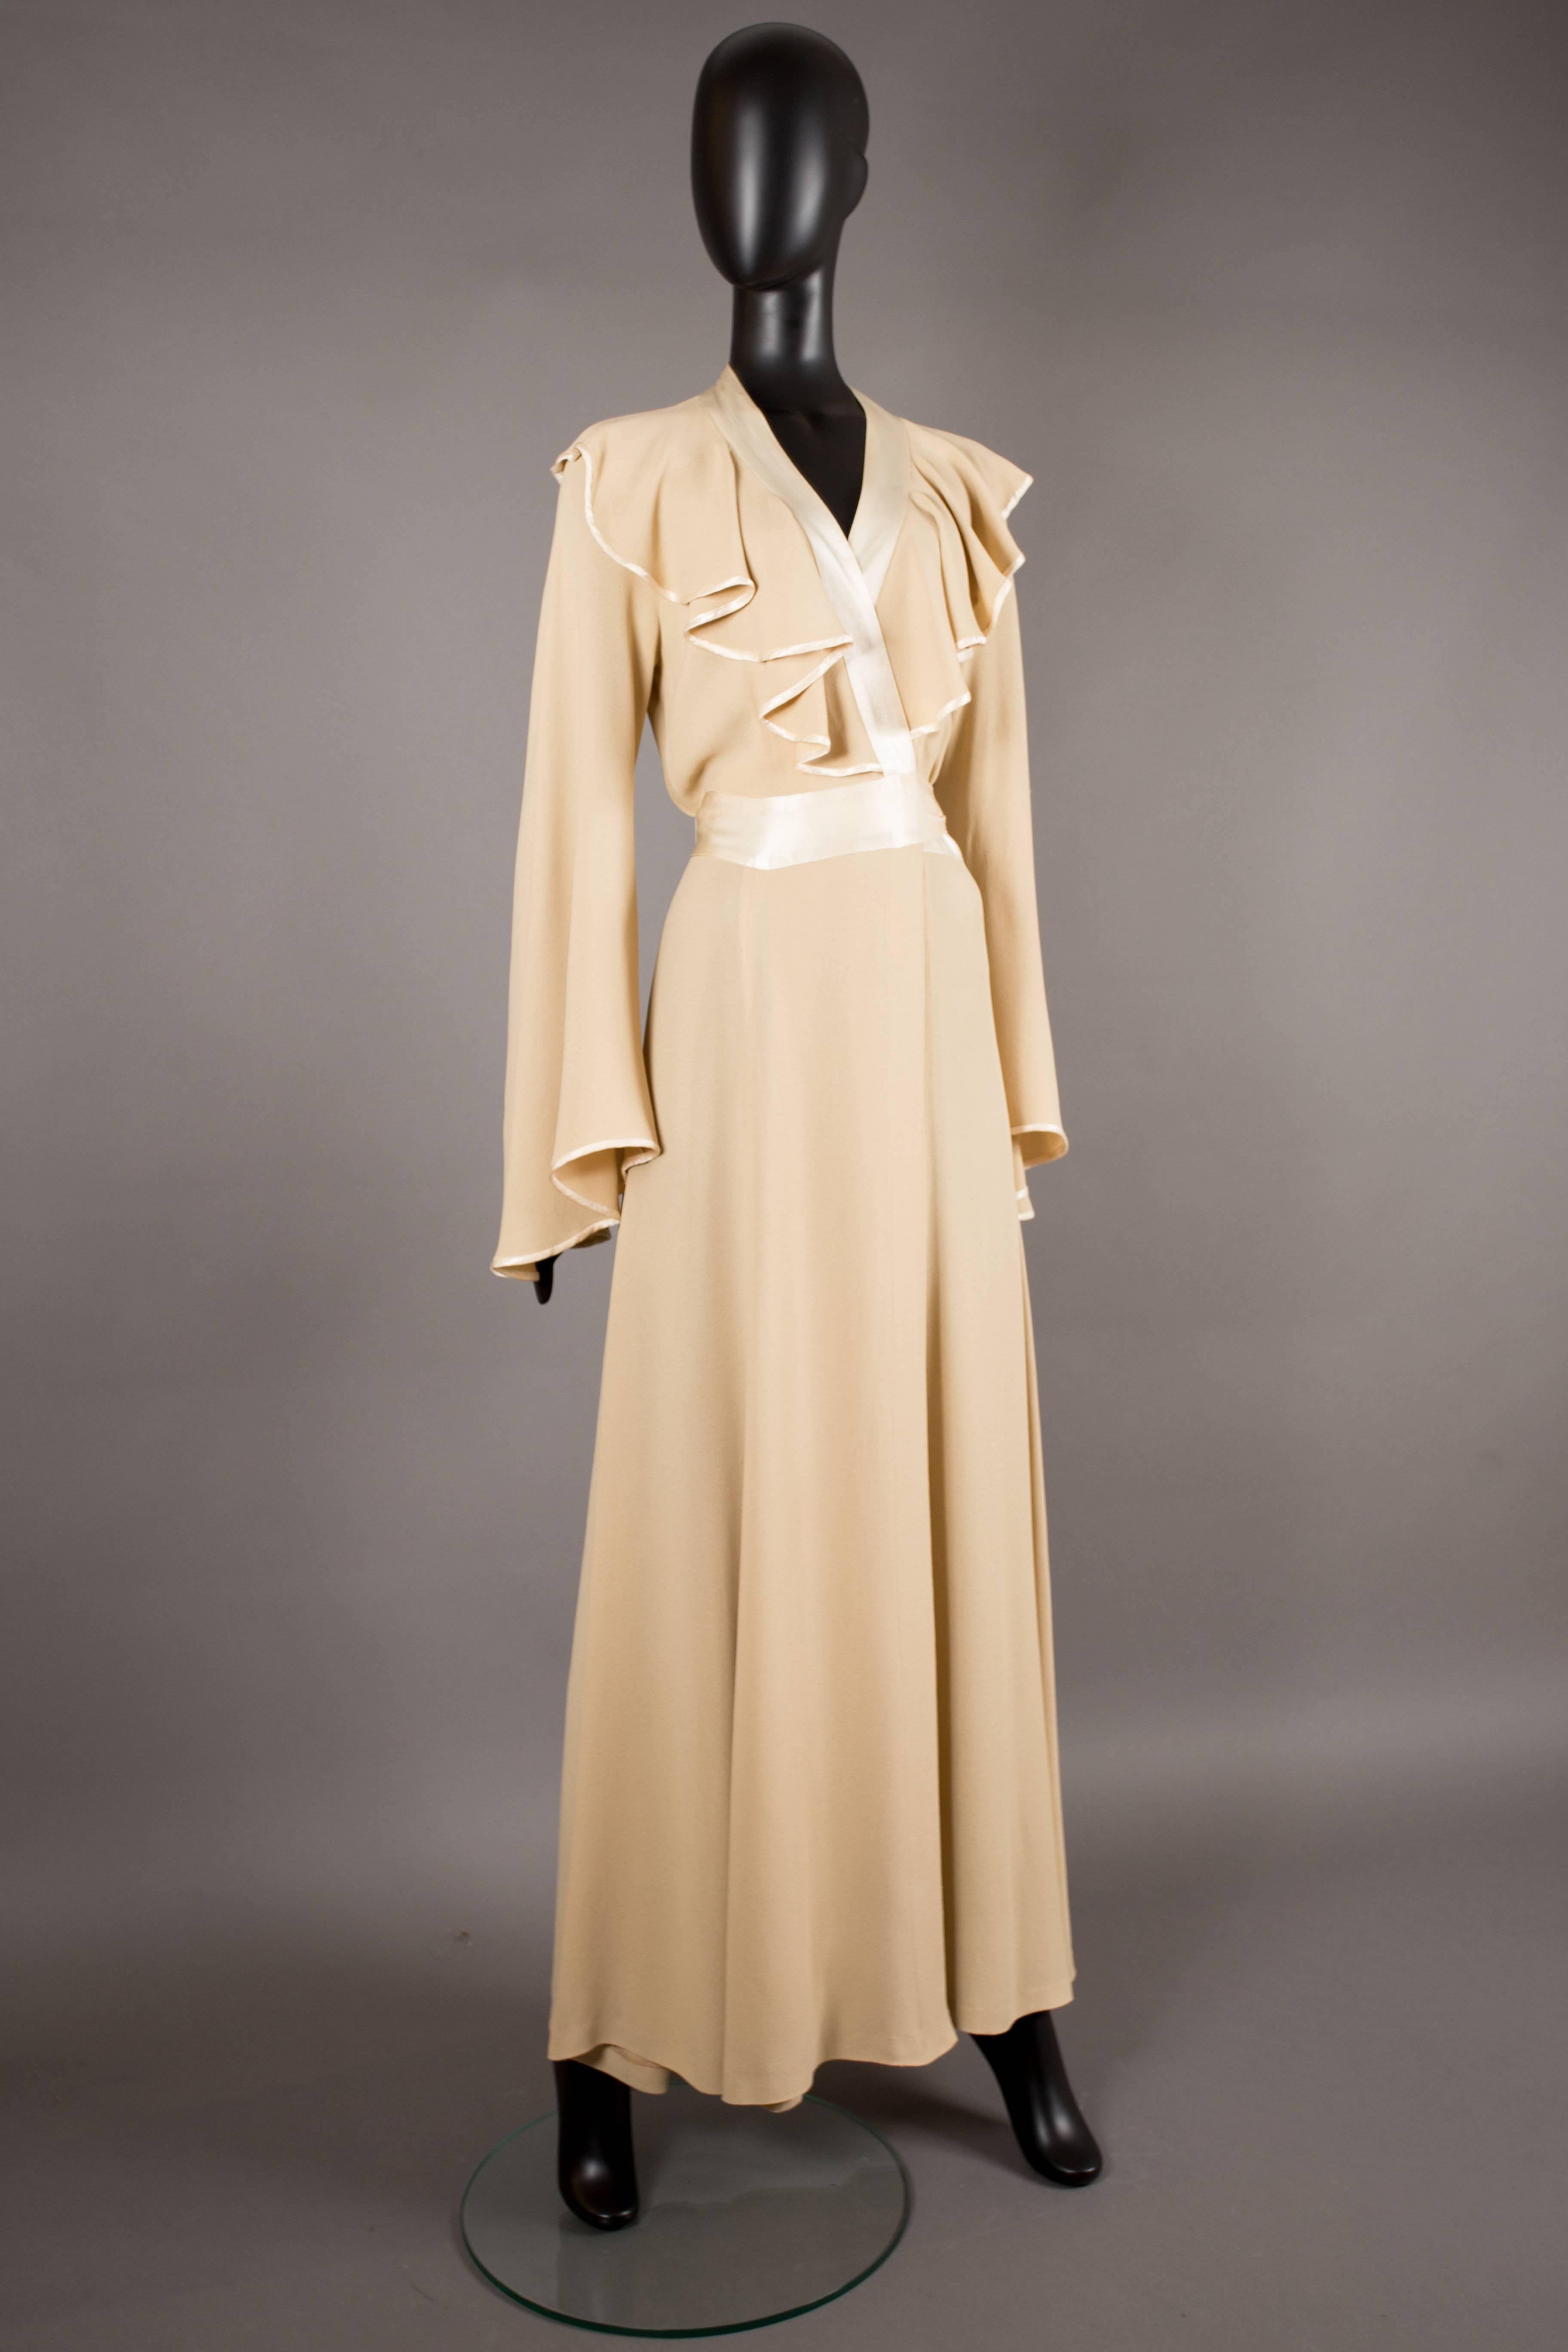 An Ossie Clark evening wrap dress, circa 1970. Champagne moss crepe, ivory satin trim, sash fastening at the rear, angel sleeves and ruffled collar. 

Size: 
Shoulder to shoulder - 18